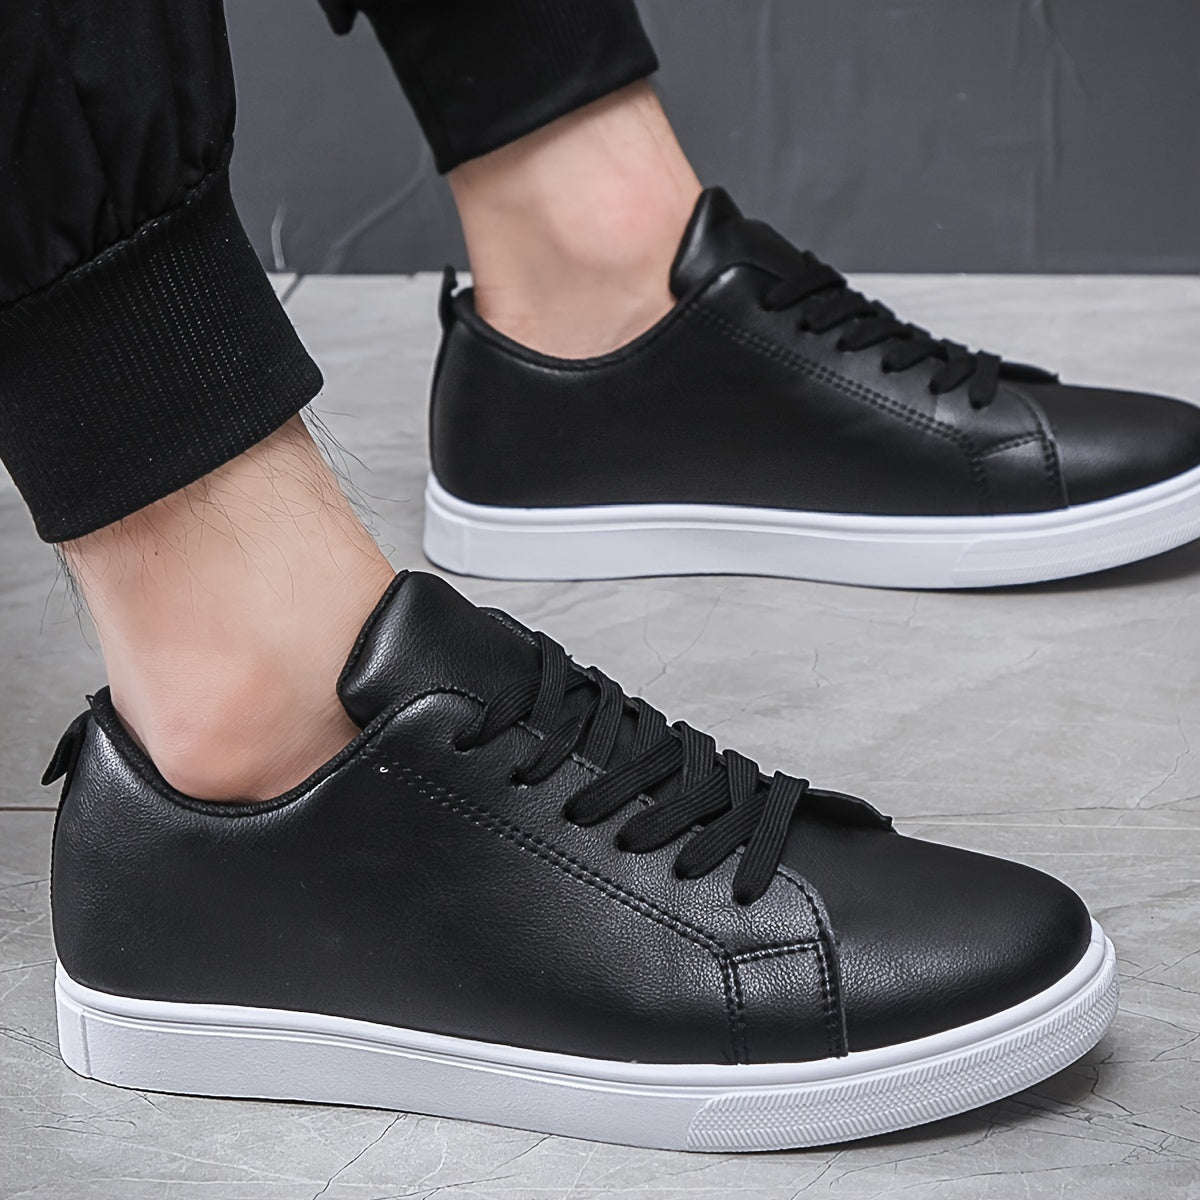 Men's Lace-up Sneakers, PU Leather Skate Shoes With Good Traction, Breathable